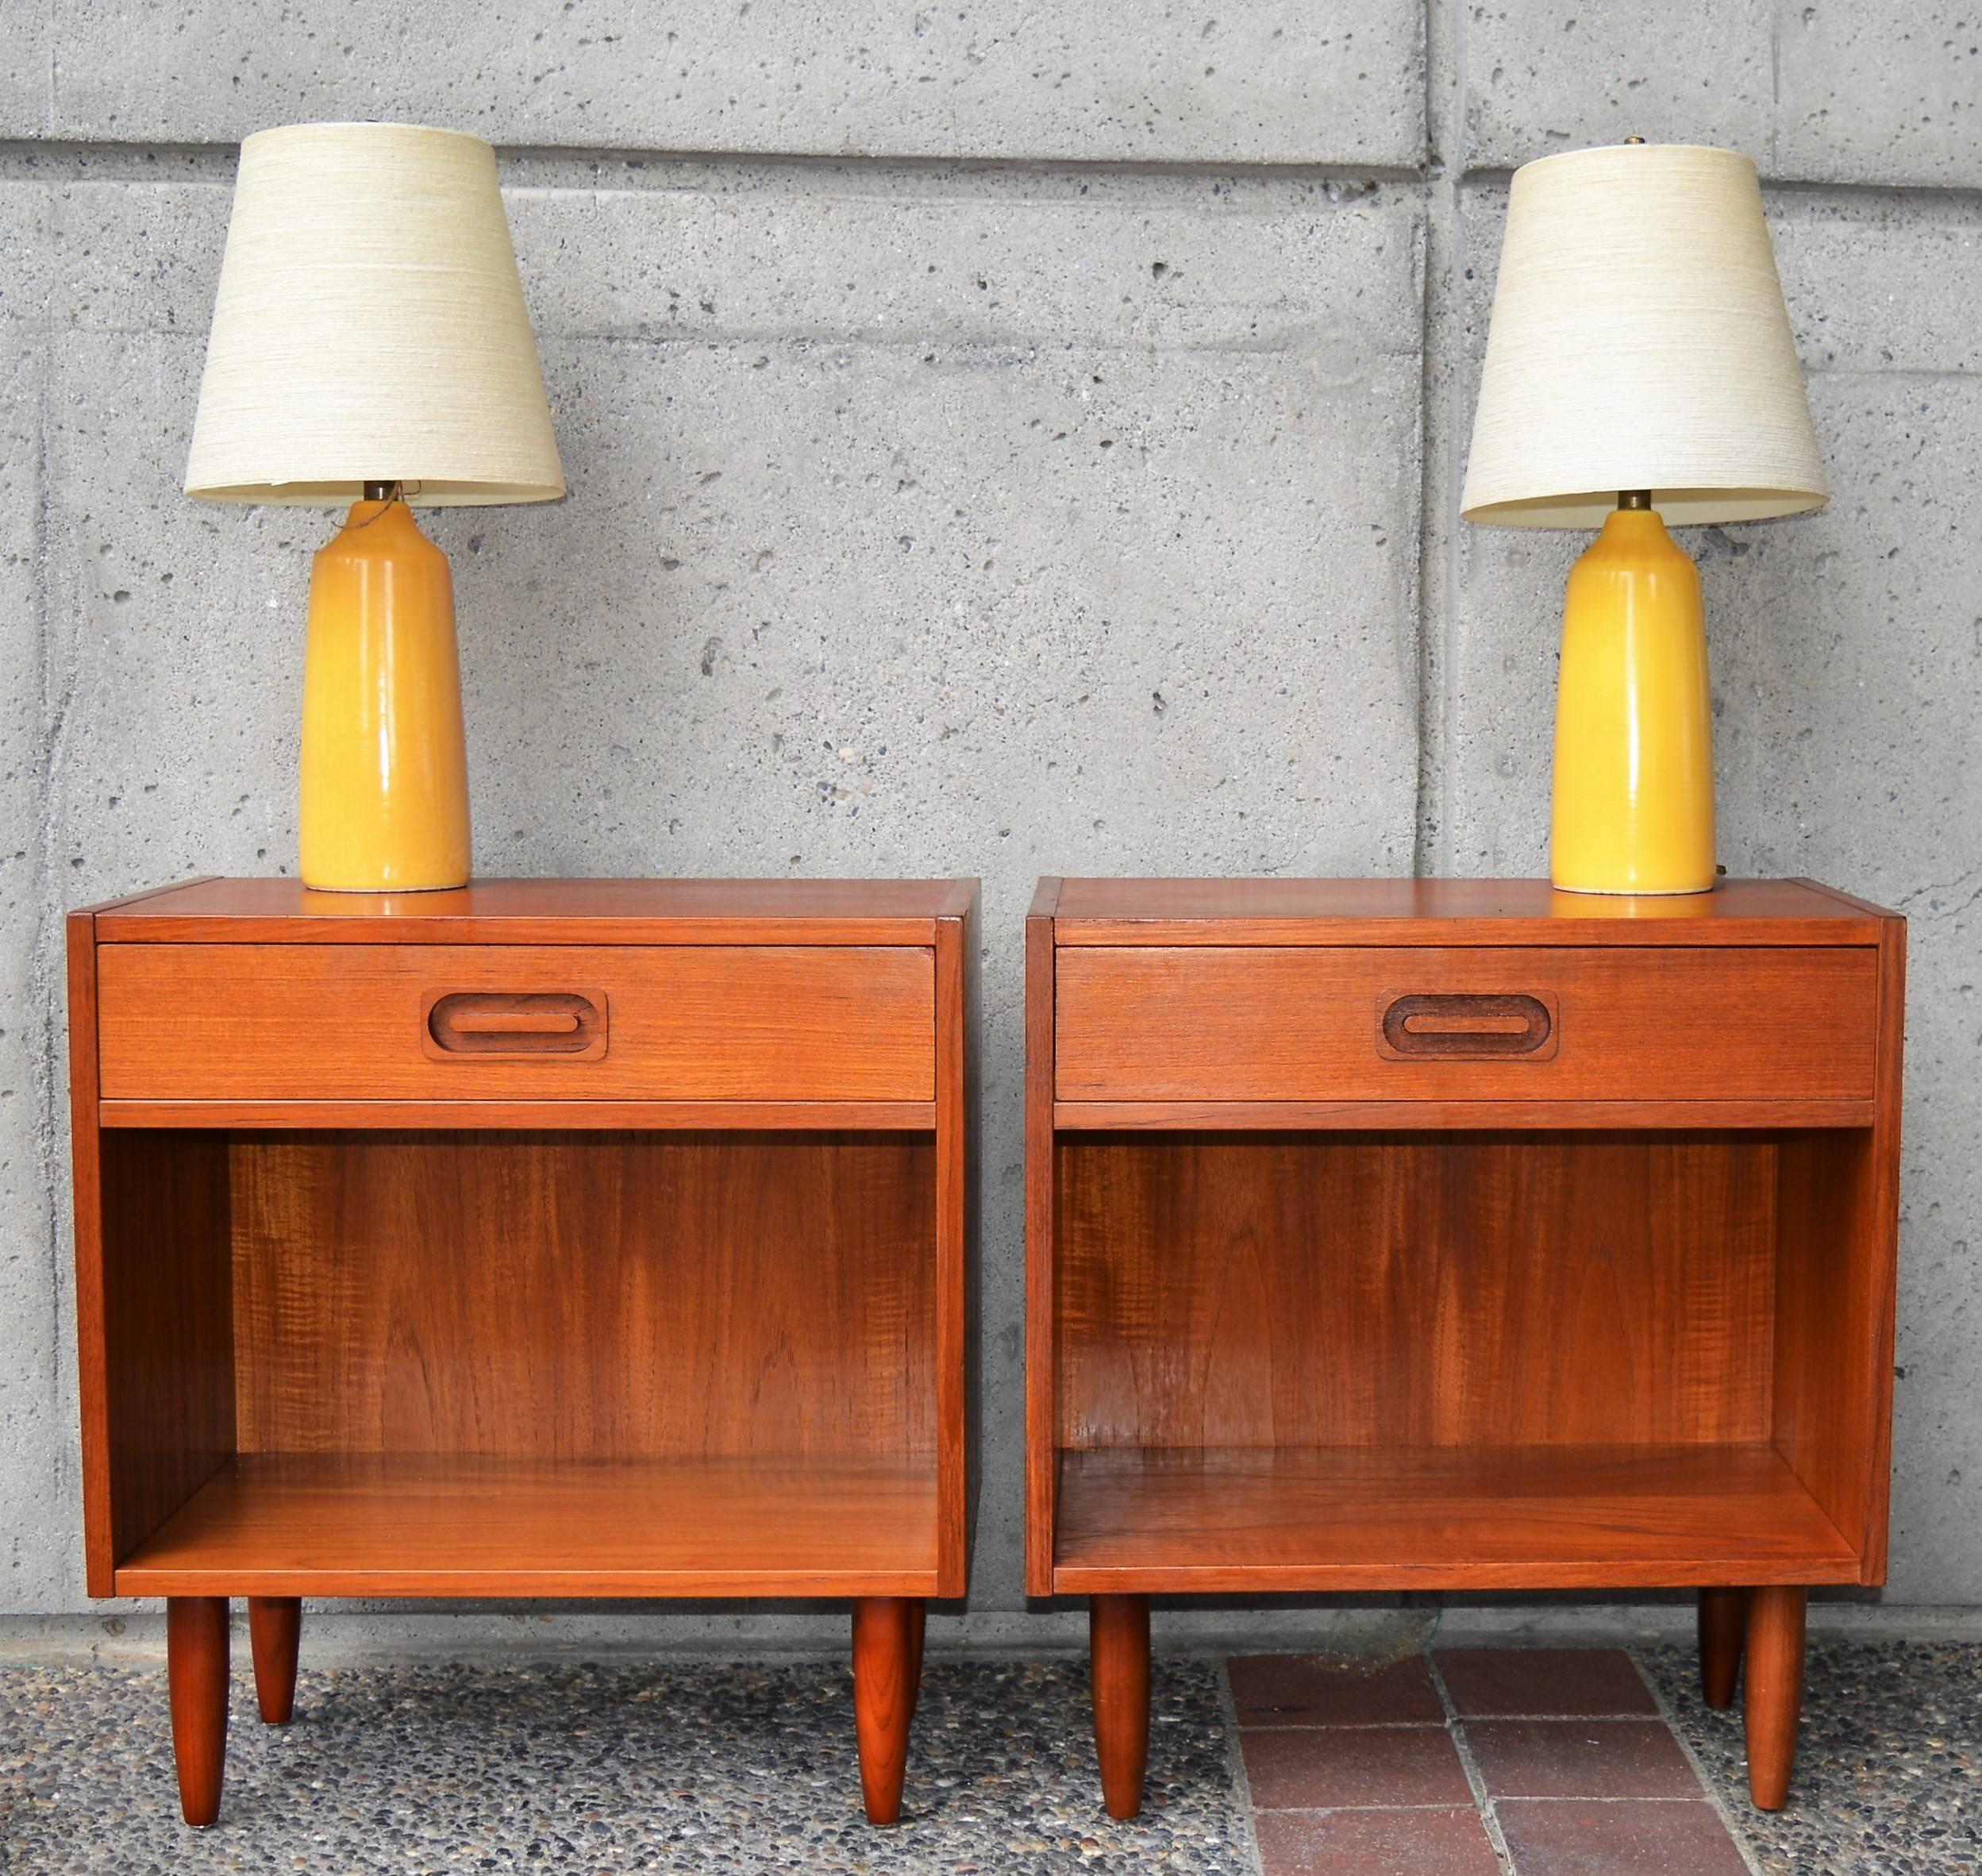 Pair of Danish Teak One Drawer & Cubby Nightstands or Bedside Tables by Dyrlund 1